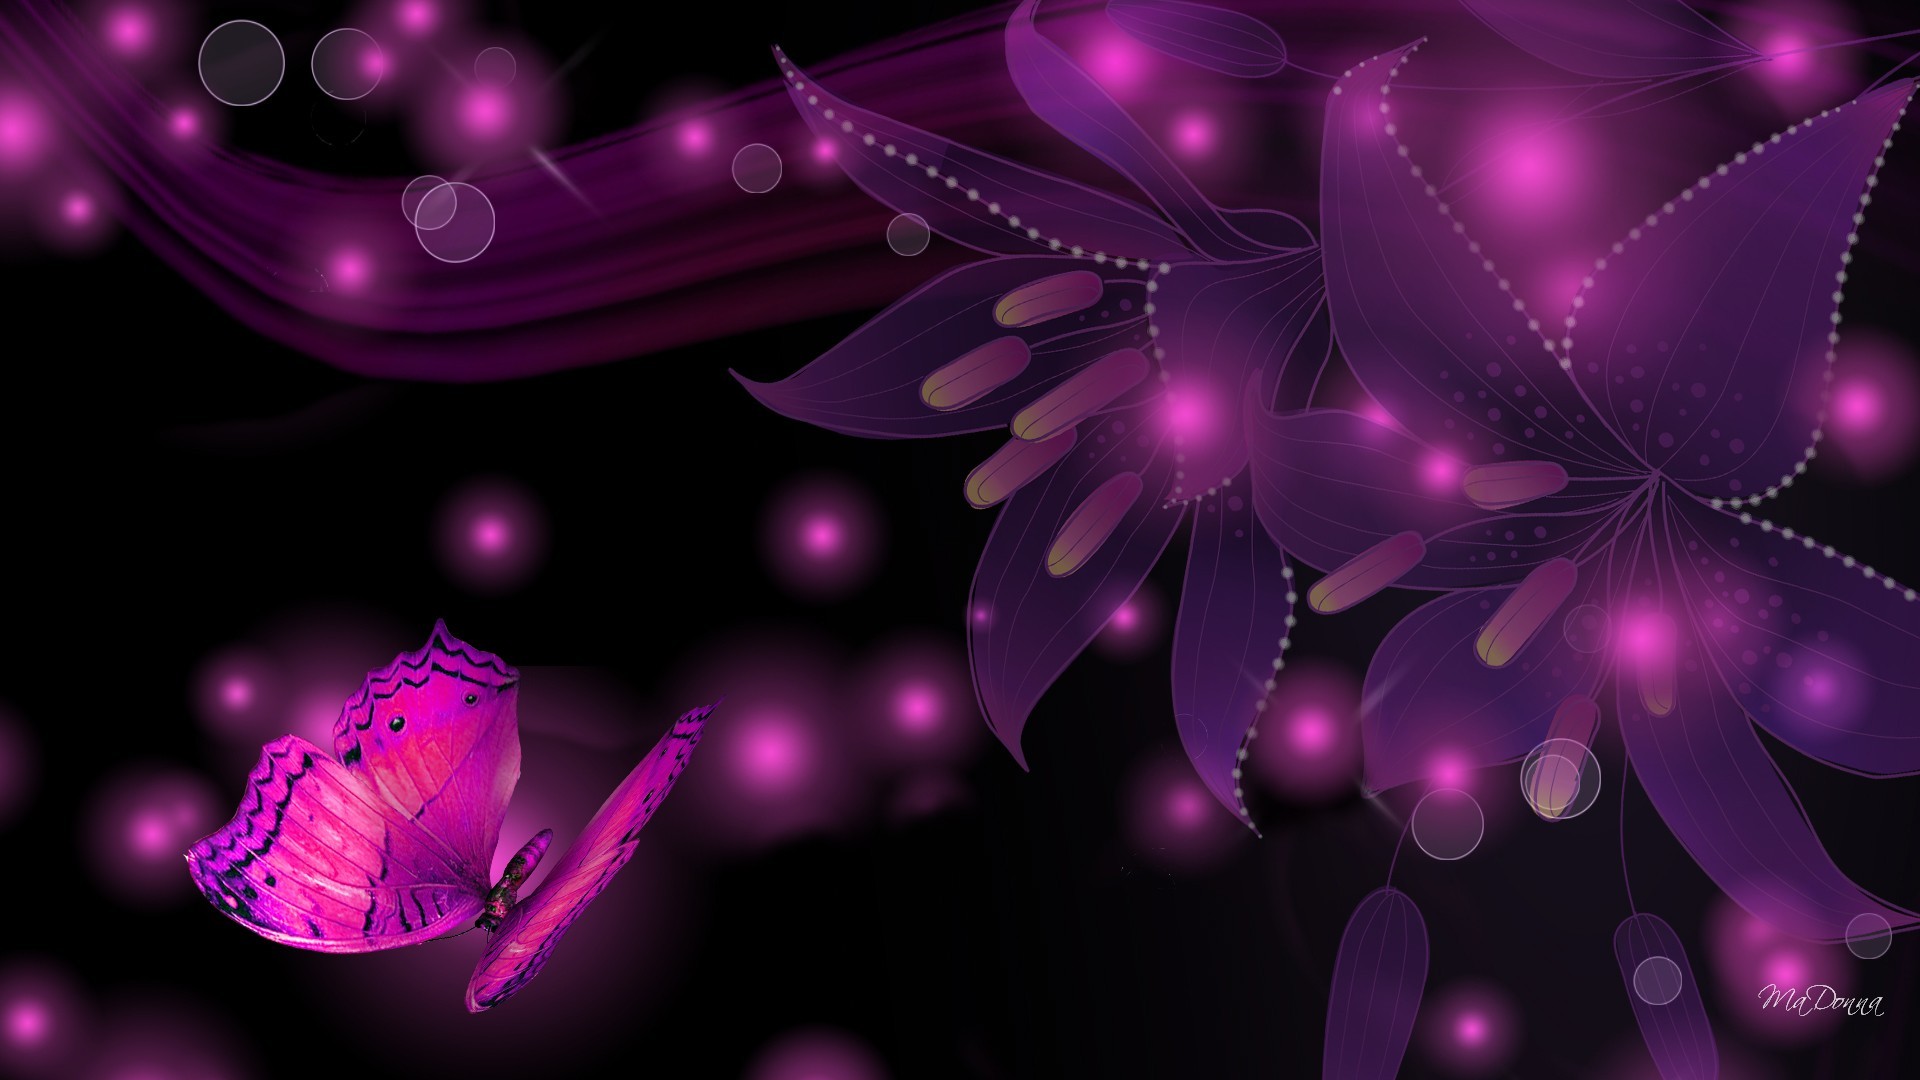 1920x1080 Pink And Black Butterfly Wallpaper - Wallpapers High Definition